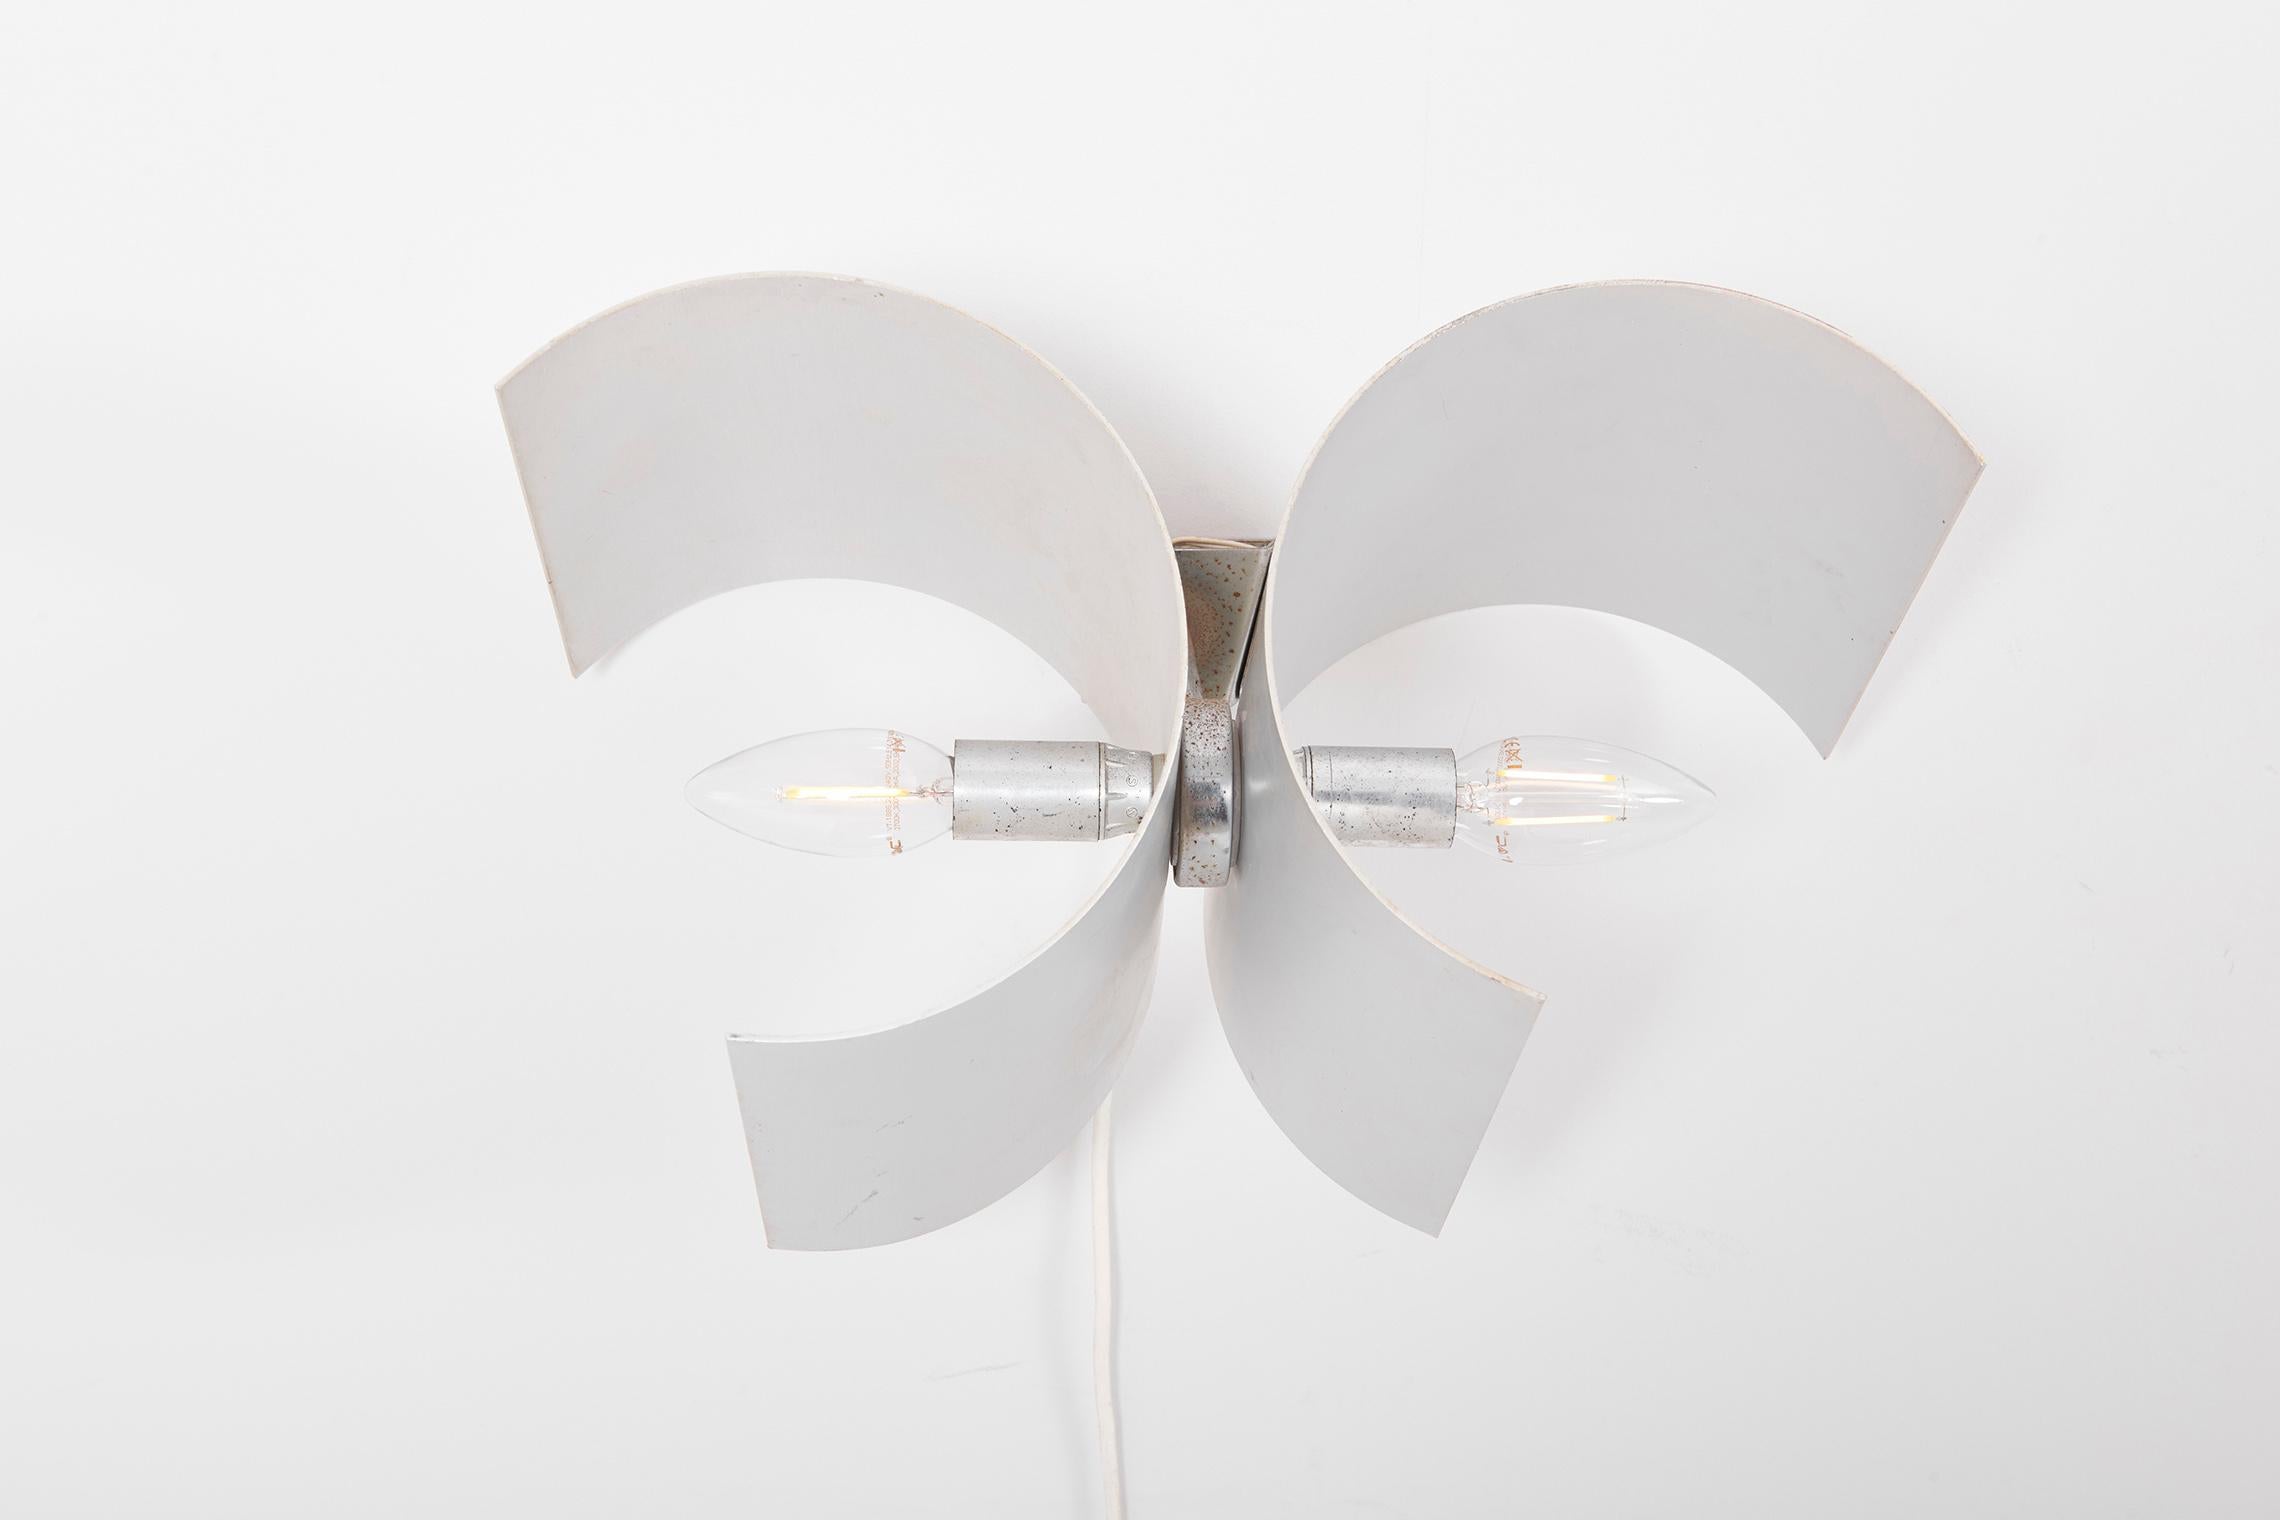 Pair of Adjustable Wall Lamps in Metal by Nucleo for Sormani, Italy - 1960s For Sale 1